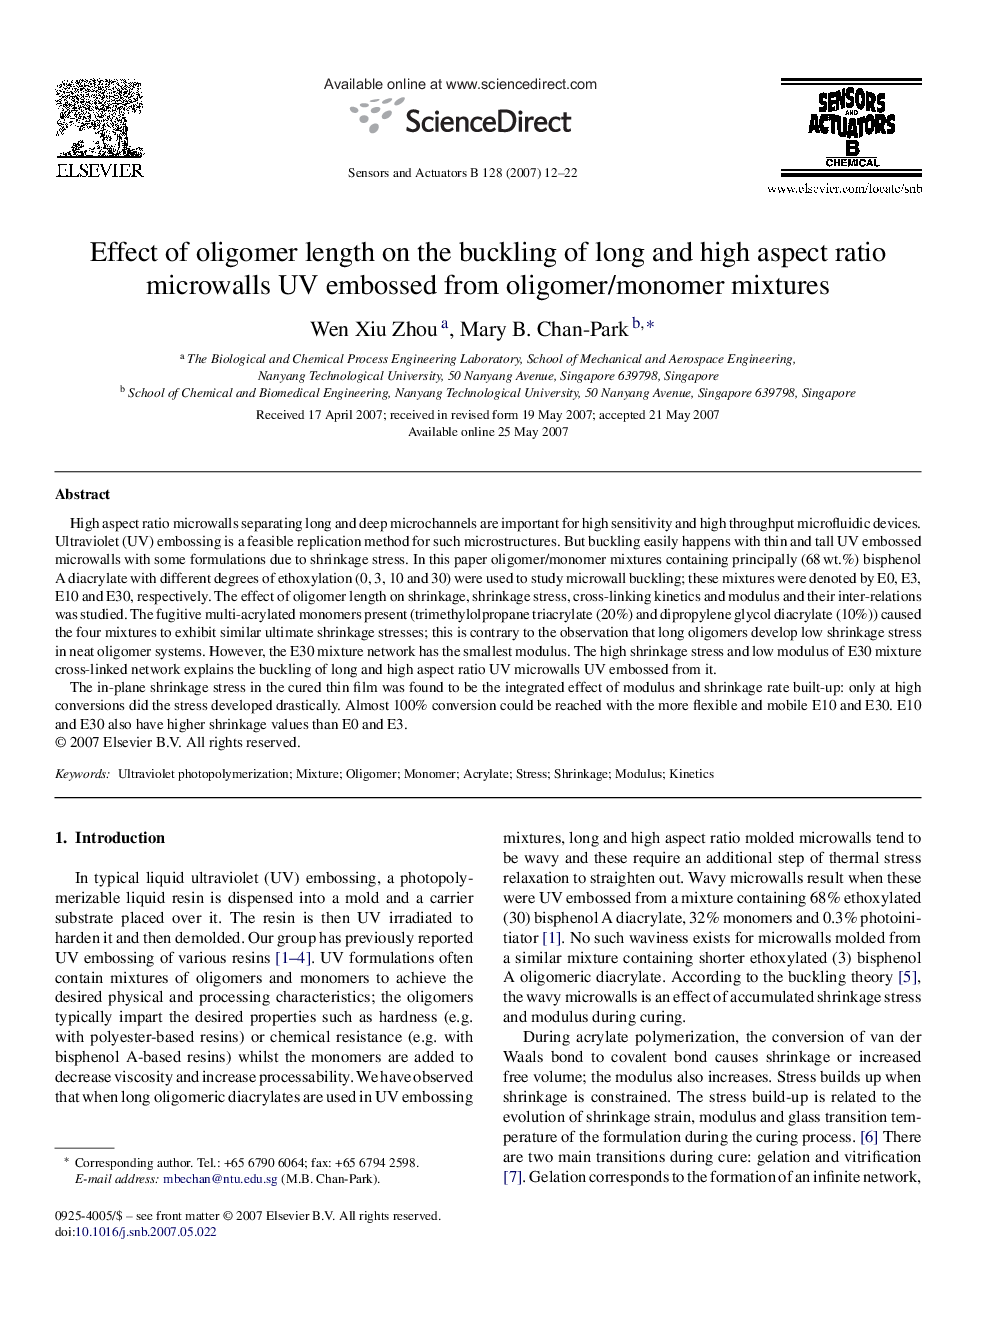 Effect of oligomer length on the buckling of long and high aspect ratio microwalls UV embossed from oligomer/monomer mixtures